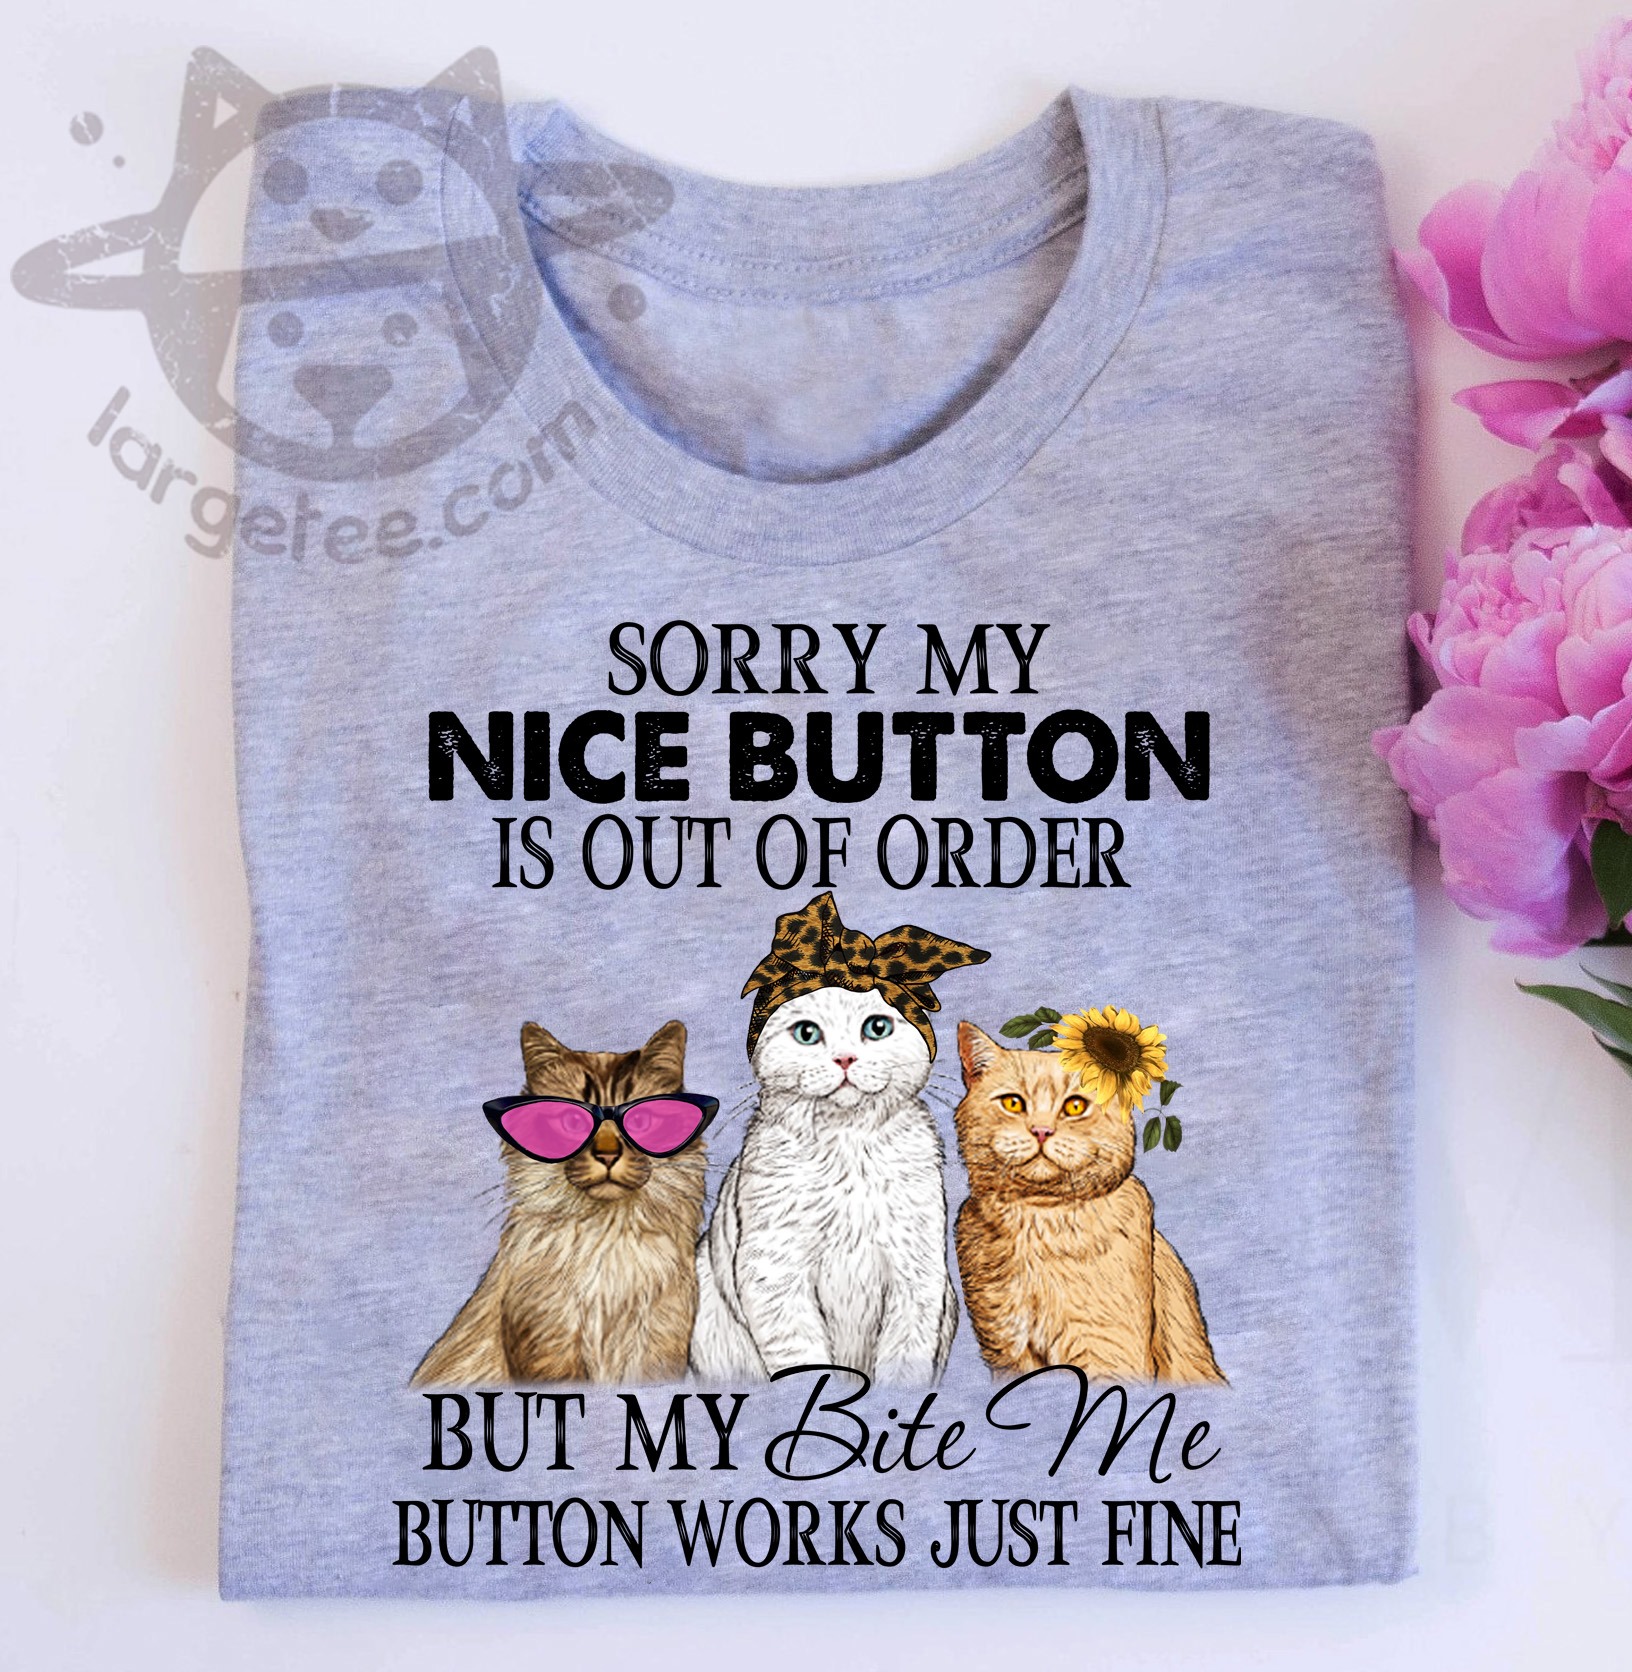 Sorry my nice button is out of order but my bite button works just fine - Cats